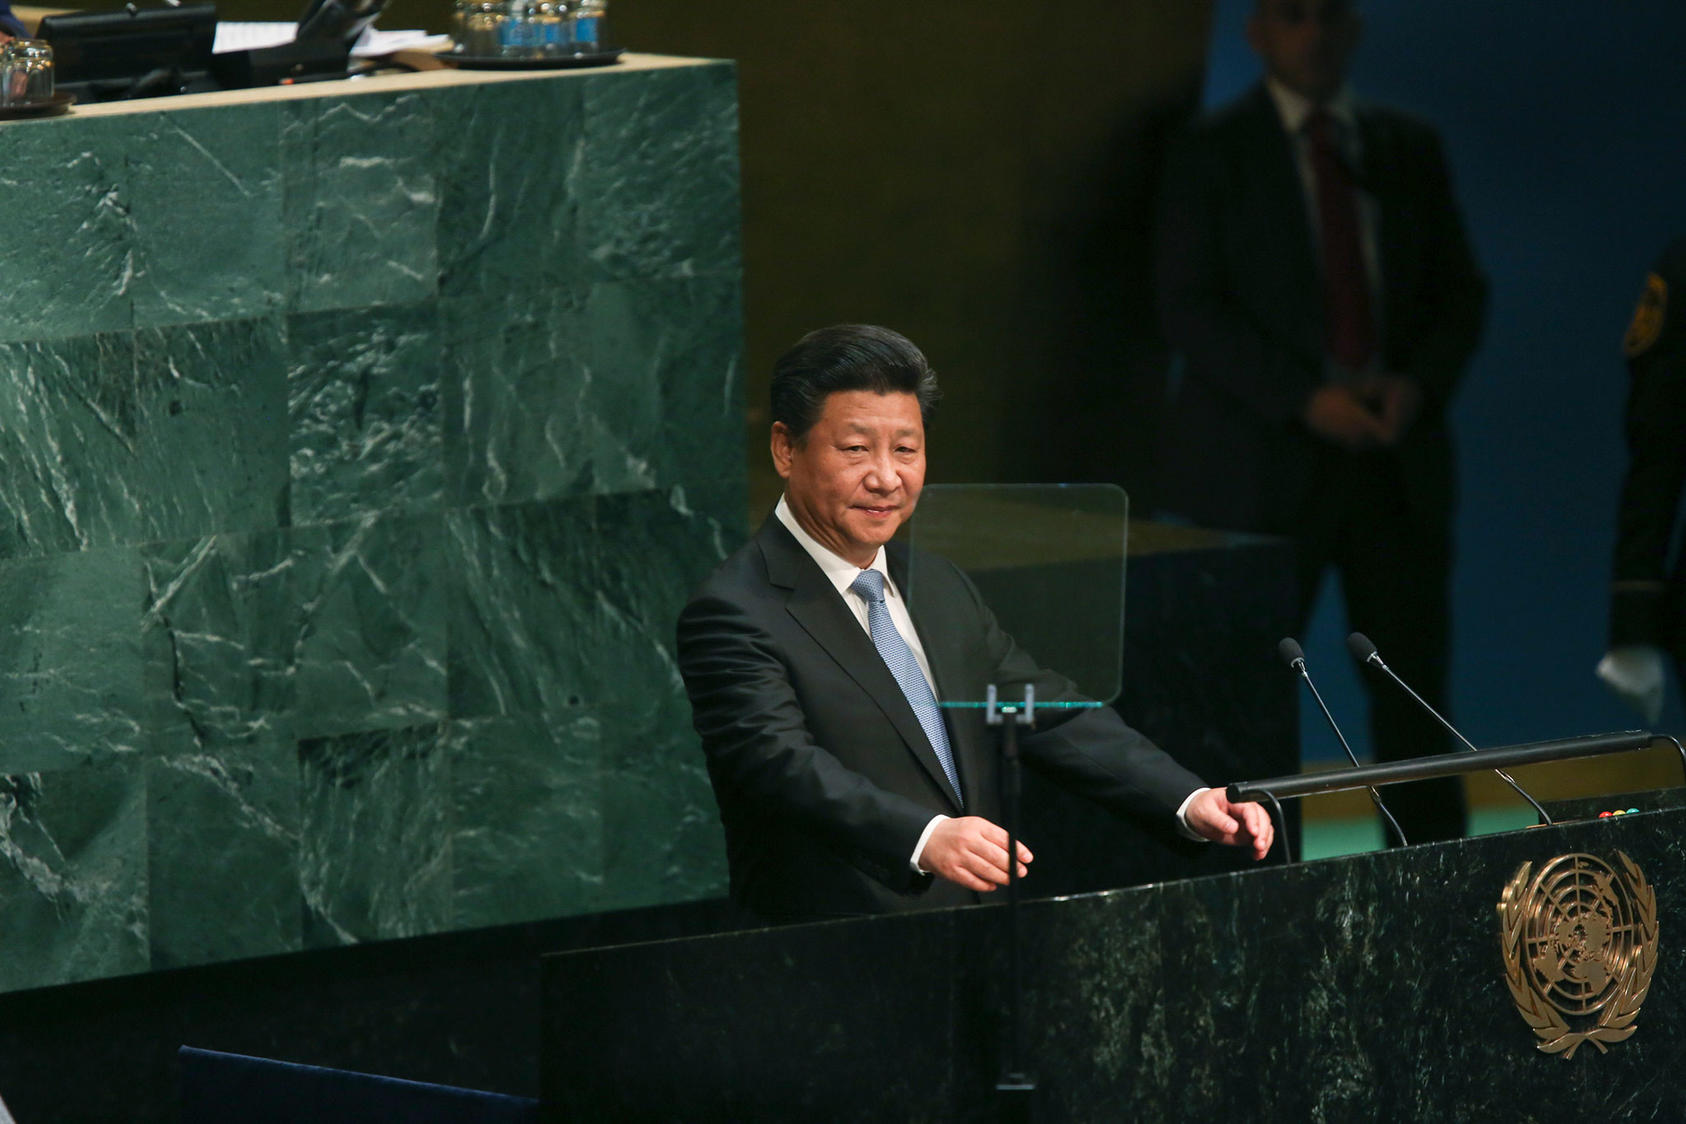 Chinese President Xi Jinping addresses the U.N., Sept. 28, 2015. While China has touted its diplomatic clout in the region, Beijing today is unwilling and unprepared to step forward in the Middle East. (Damon Winter/The New York Times)